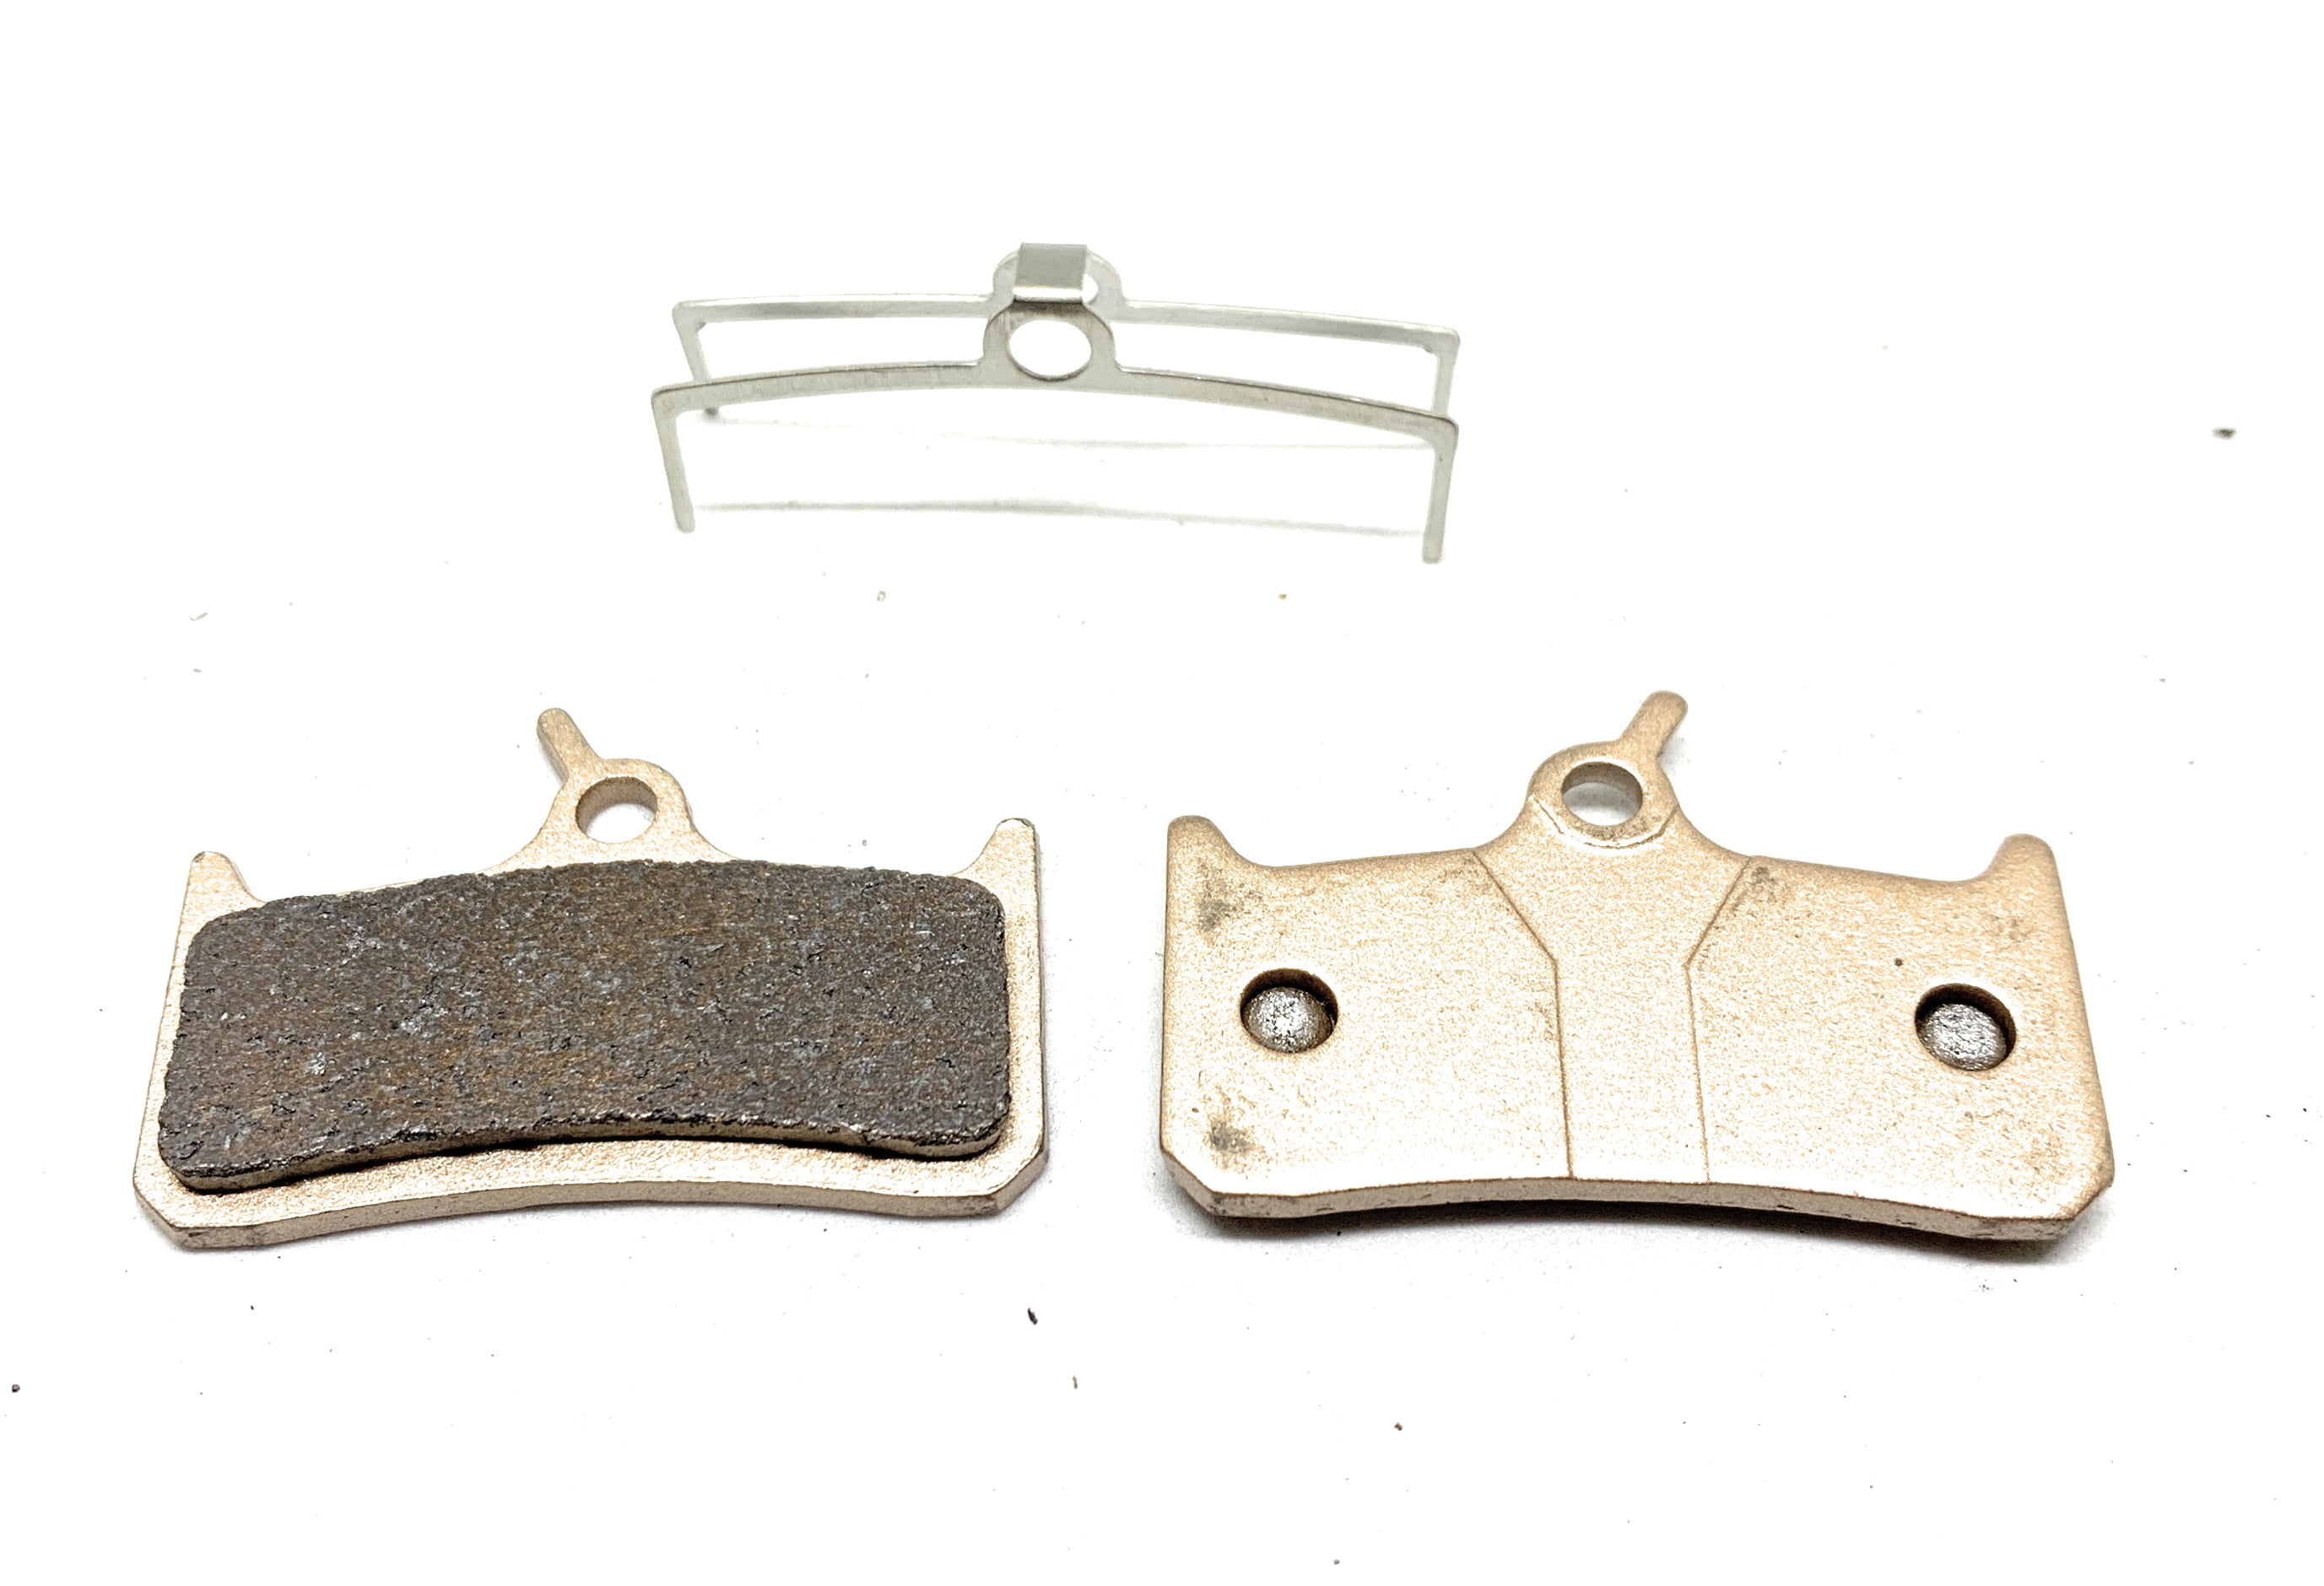 Clarks SINTERED Disc Brake PADS for Shimano DEORE BR-M555 Hydraulic 00015 